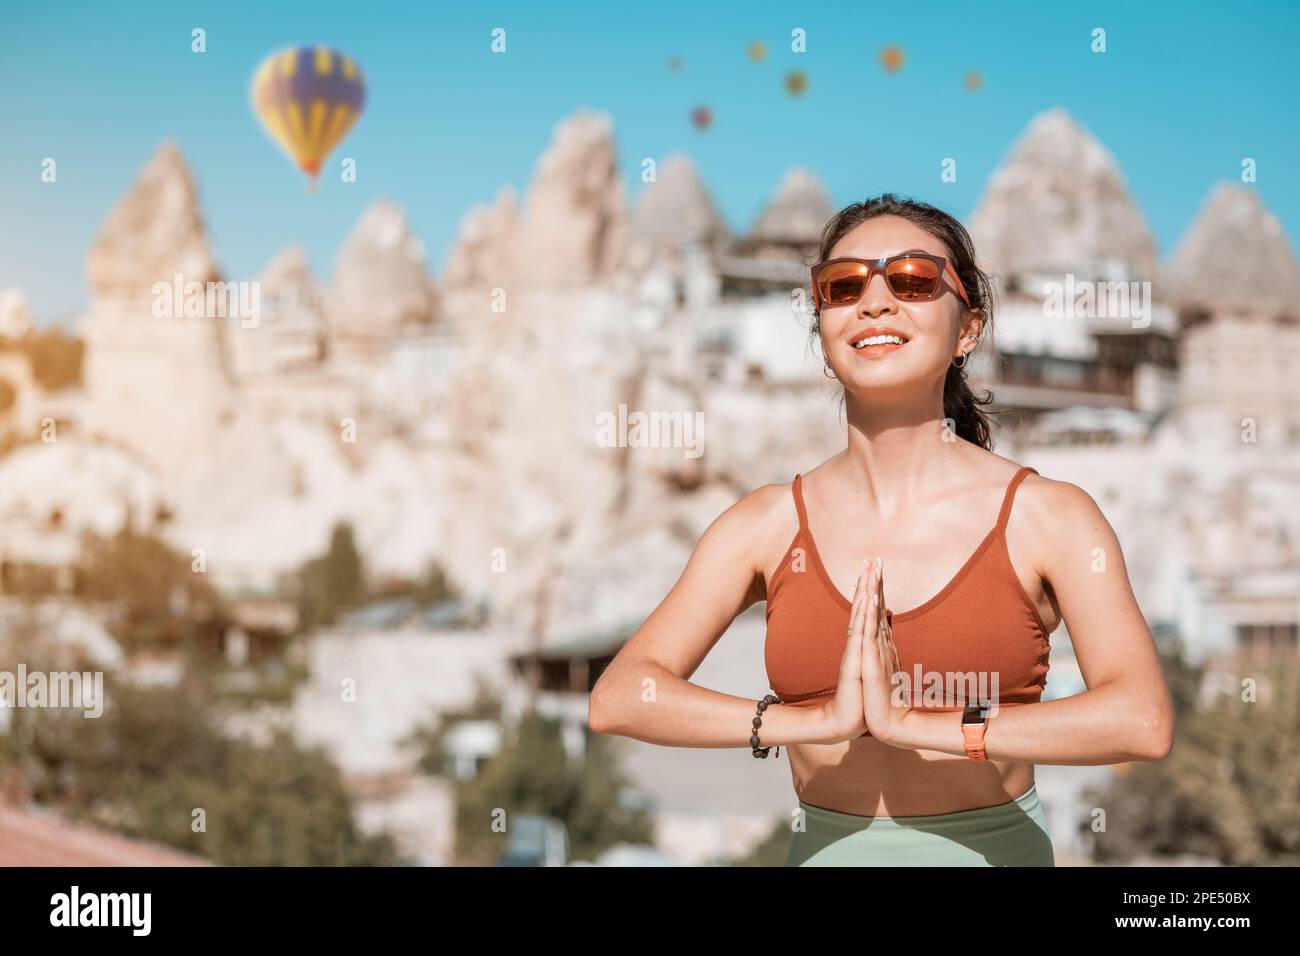 Happy girl does yoga exercises and meditation in Cappadocia, Turkey, with hot air balloons flying in the background Stock Photo